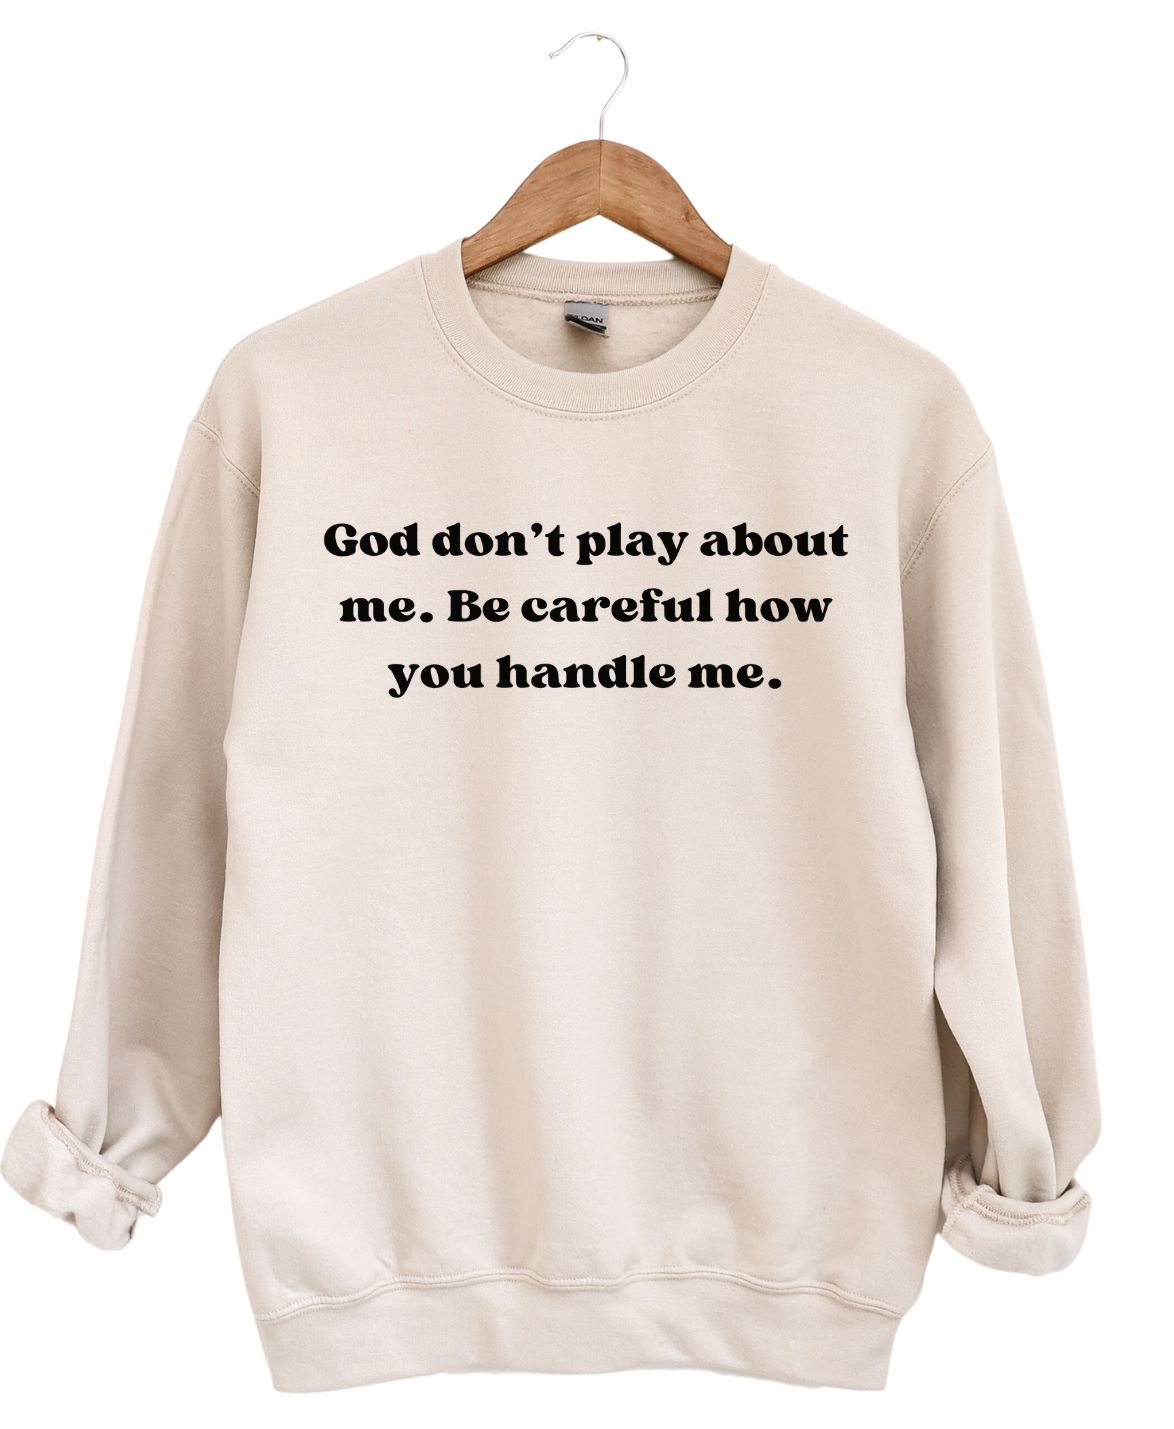 God Don't Play about Me   -Sweatshirt